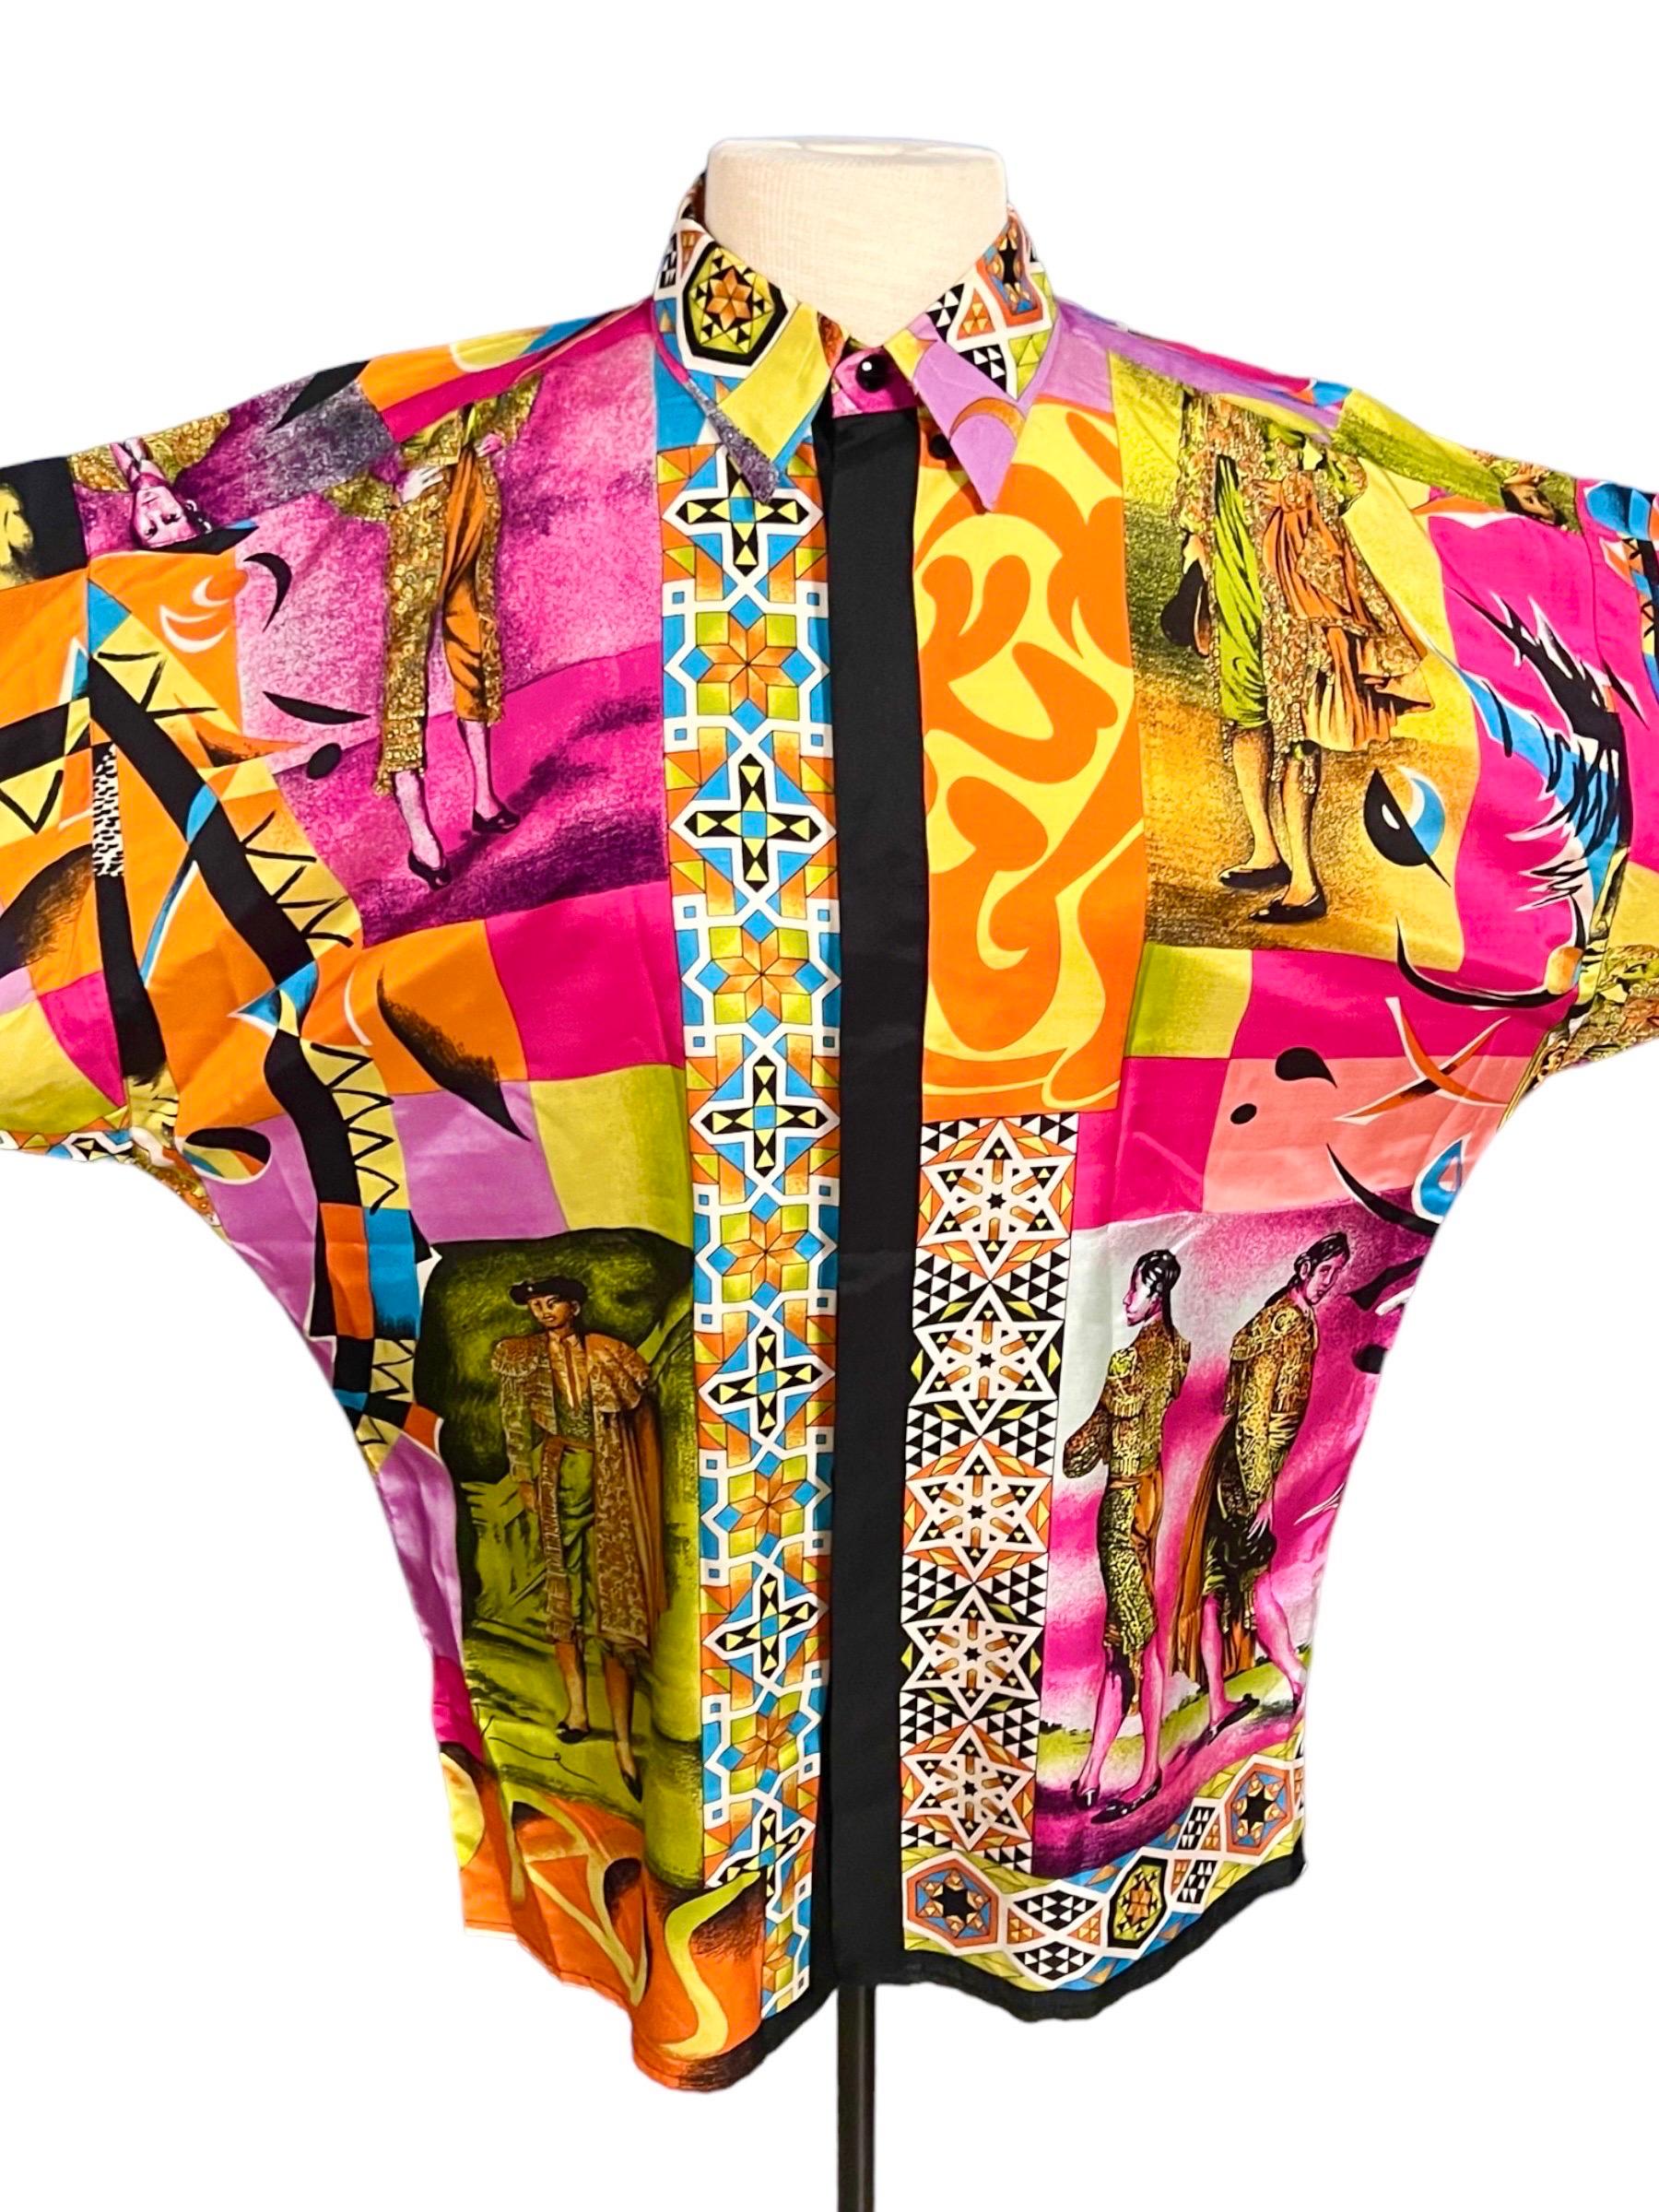 Gianni Versace Toros Silk Shirt from 1992.

This shirt shows Matador and Bull themes with abstract groovy patterns throughout.

Condition: Excellent.

Size: IT 46, a Men’s US size Small, This can be worn Unisex, please refer to